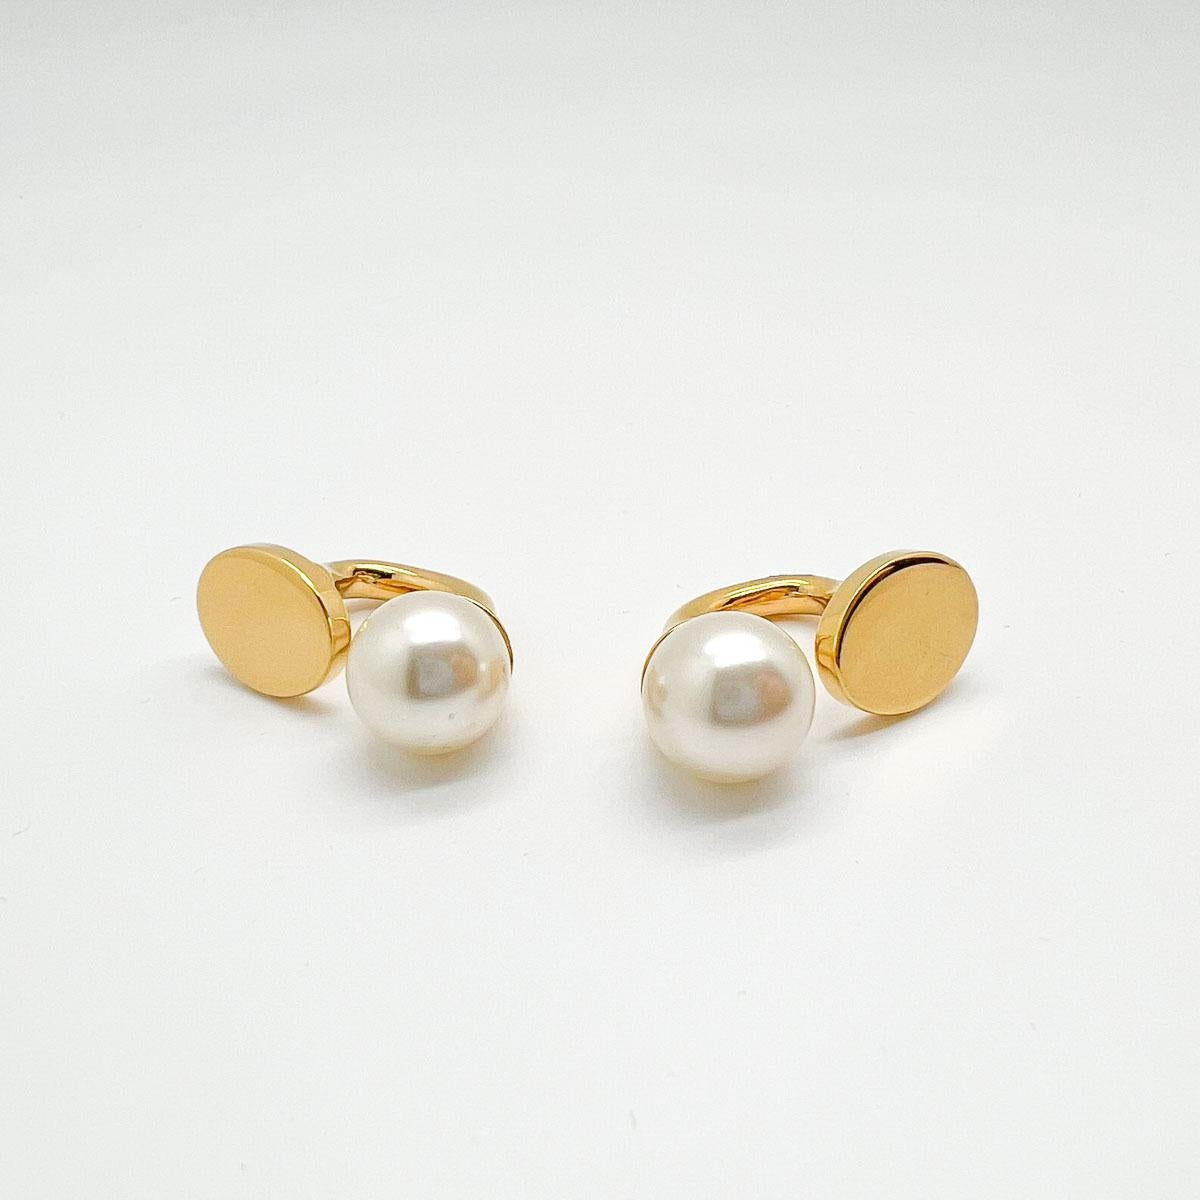 A wonderfully demure, edgy pair of Chloe pearl earrings.
Maison Chloé is world-famous for luxurious, free spirited, always feminine, unique couture designs. This unique style earning the House a sophisticated clientele. Originally founded by